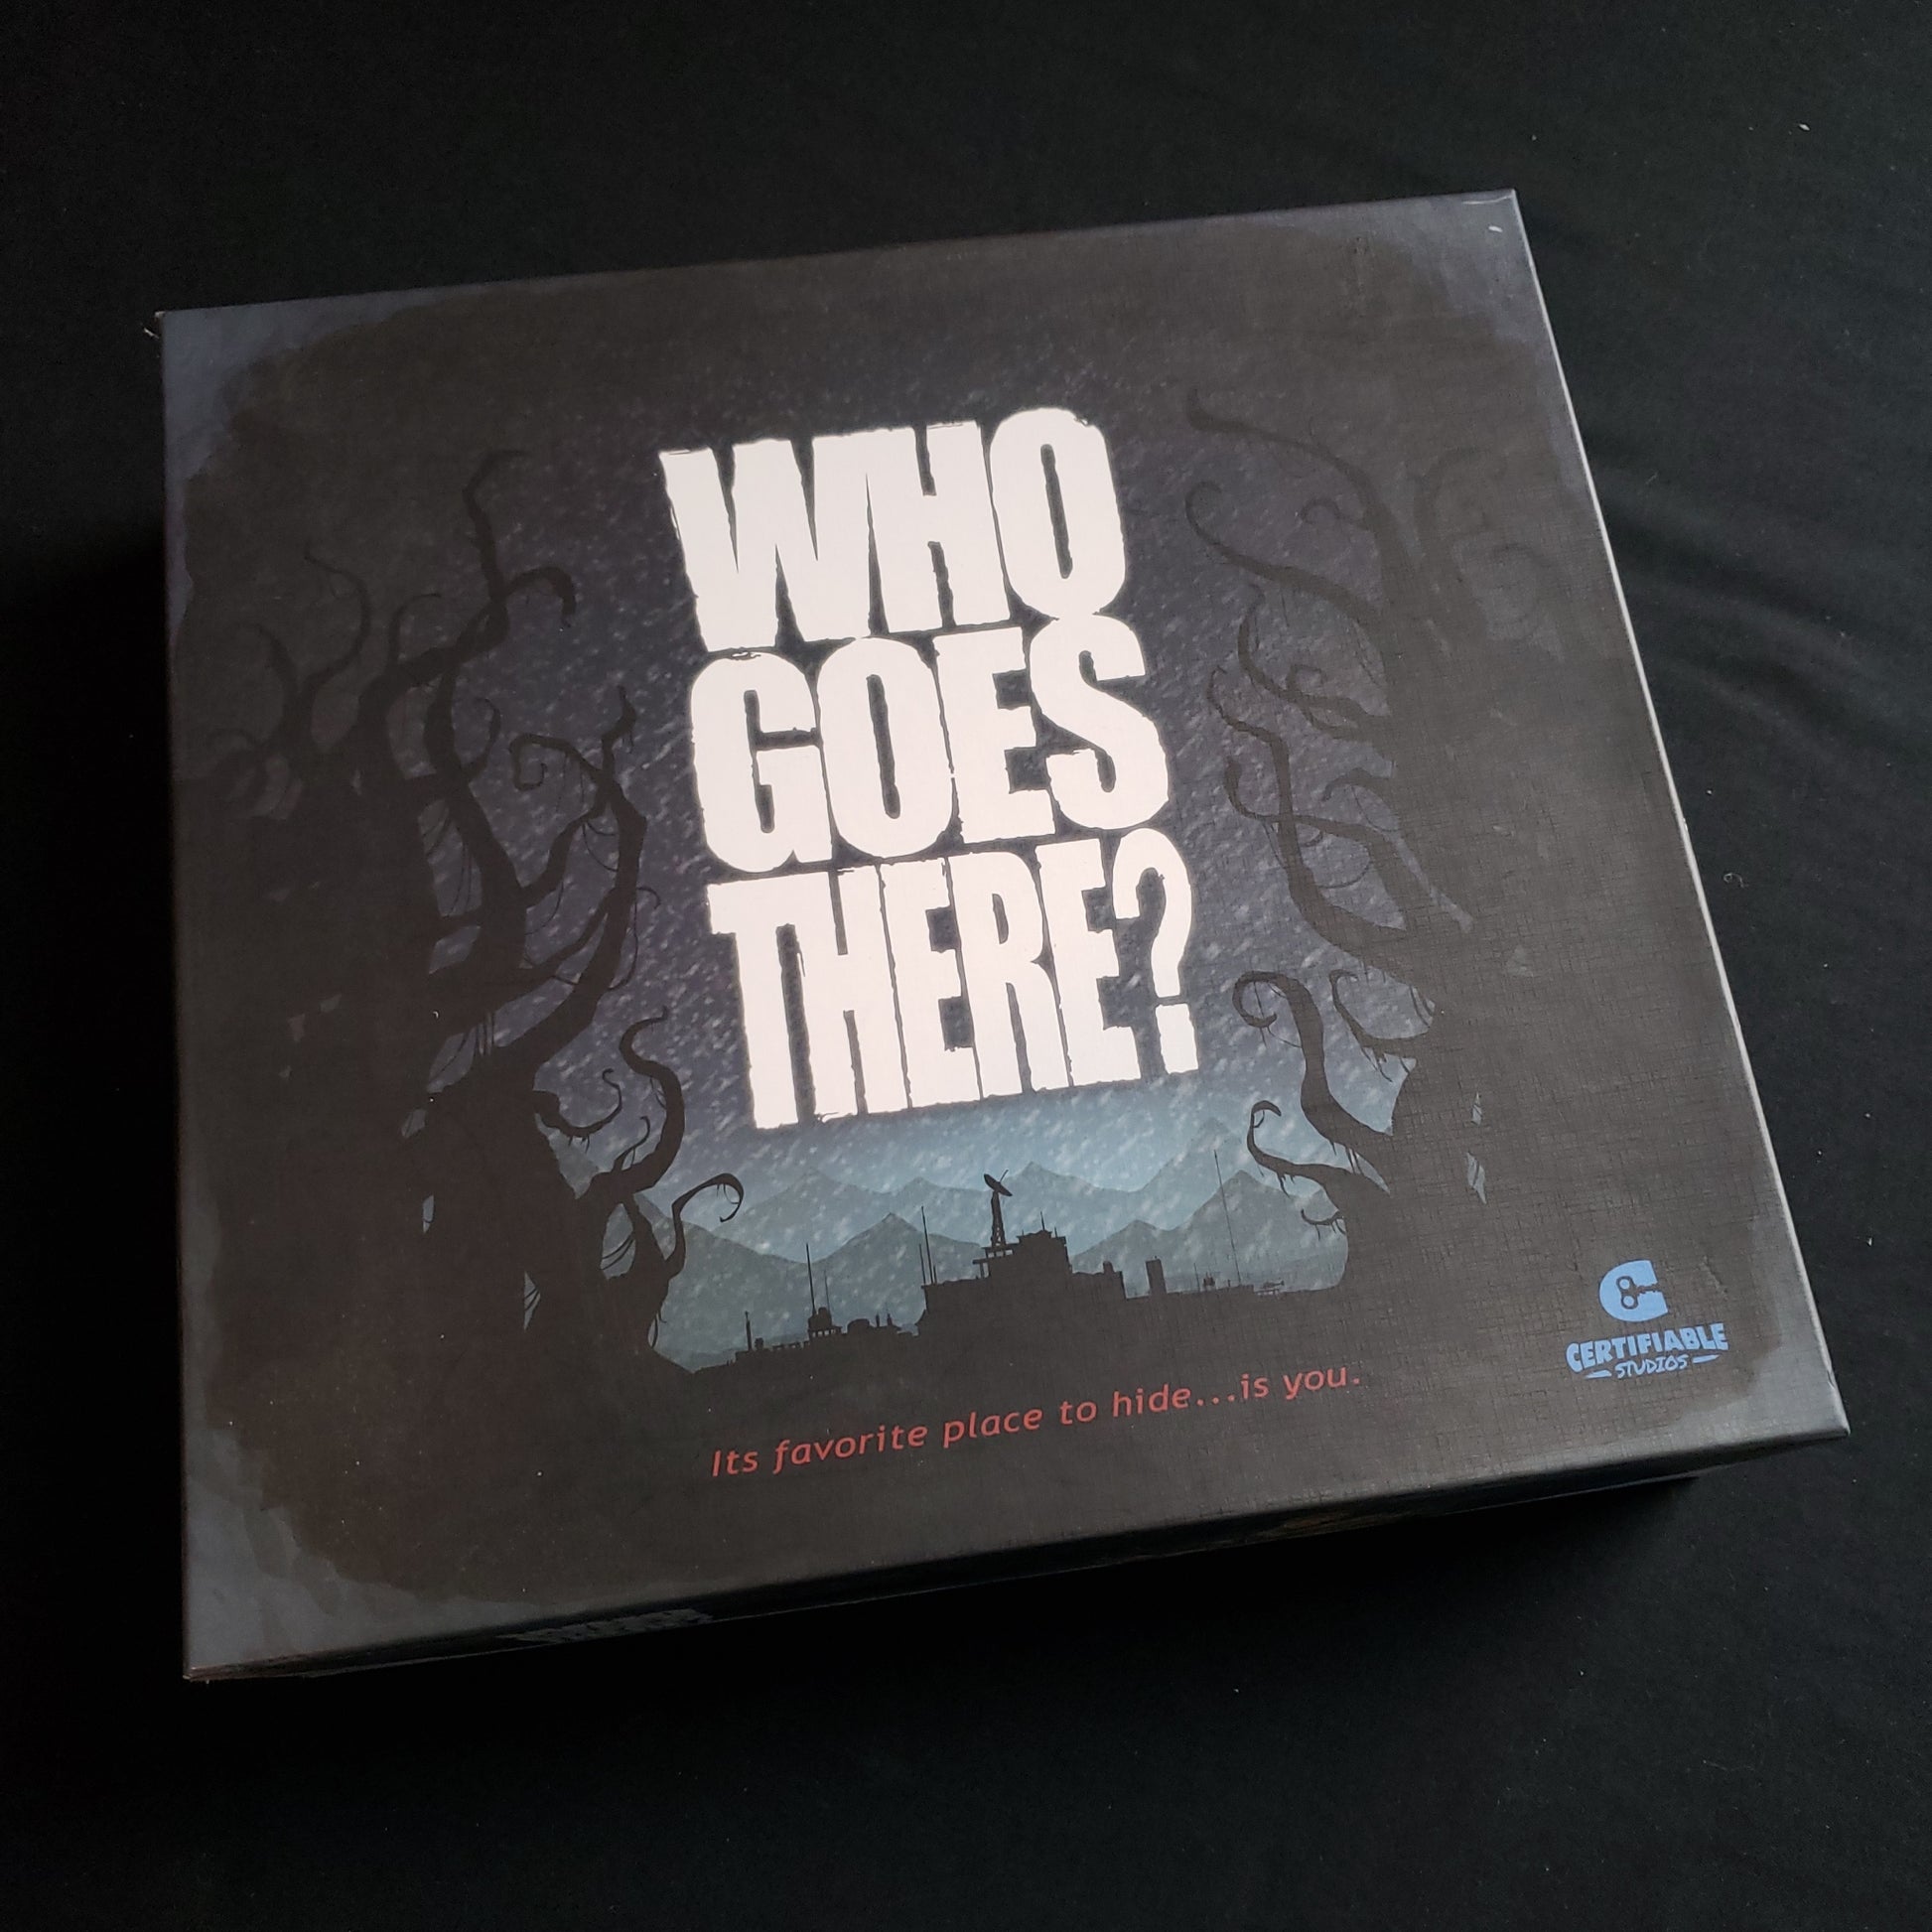 Image shows the front cover of the box of the Who Goes There? board game